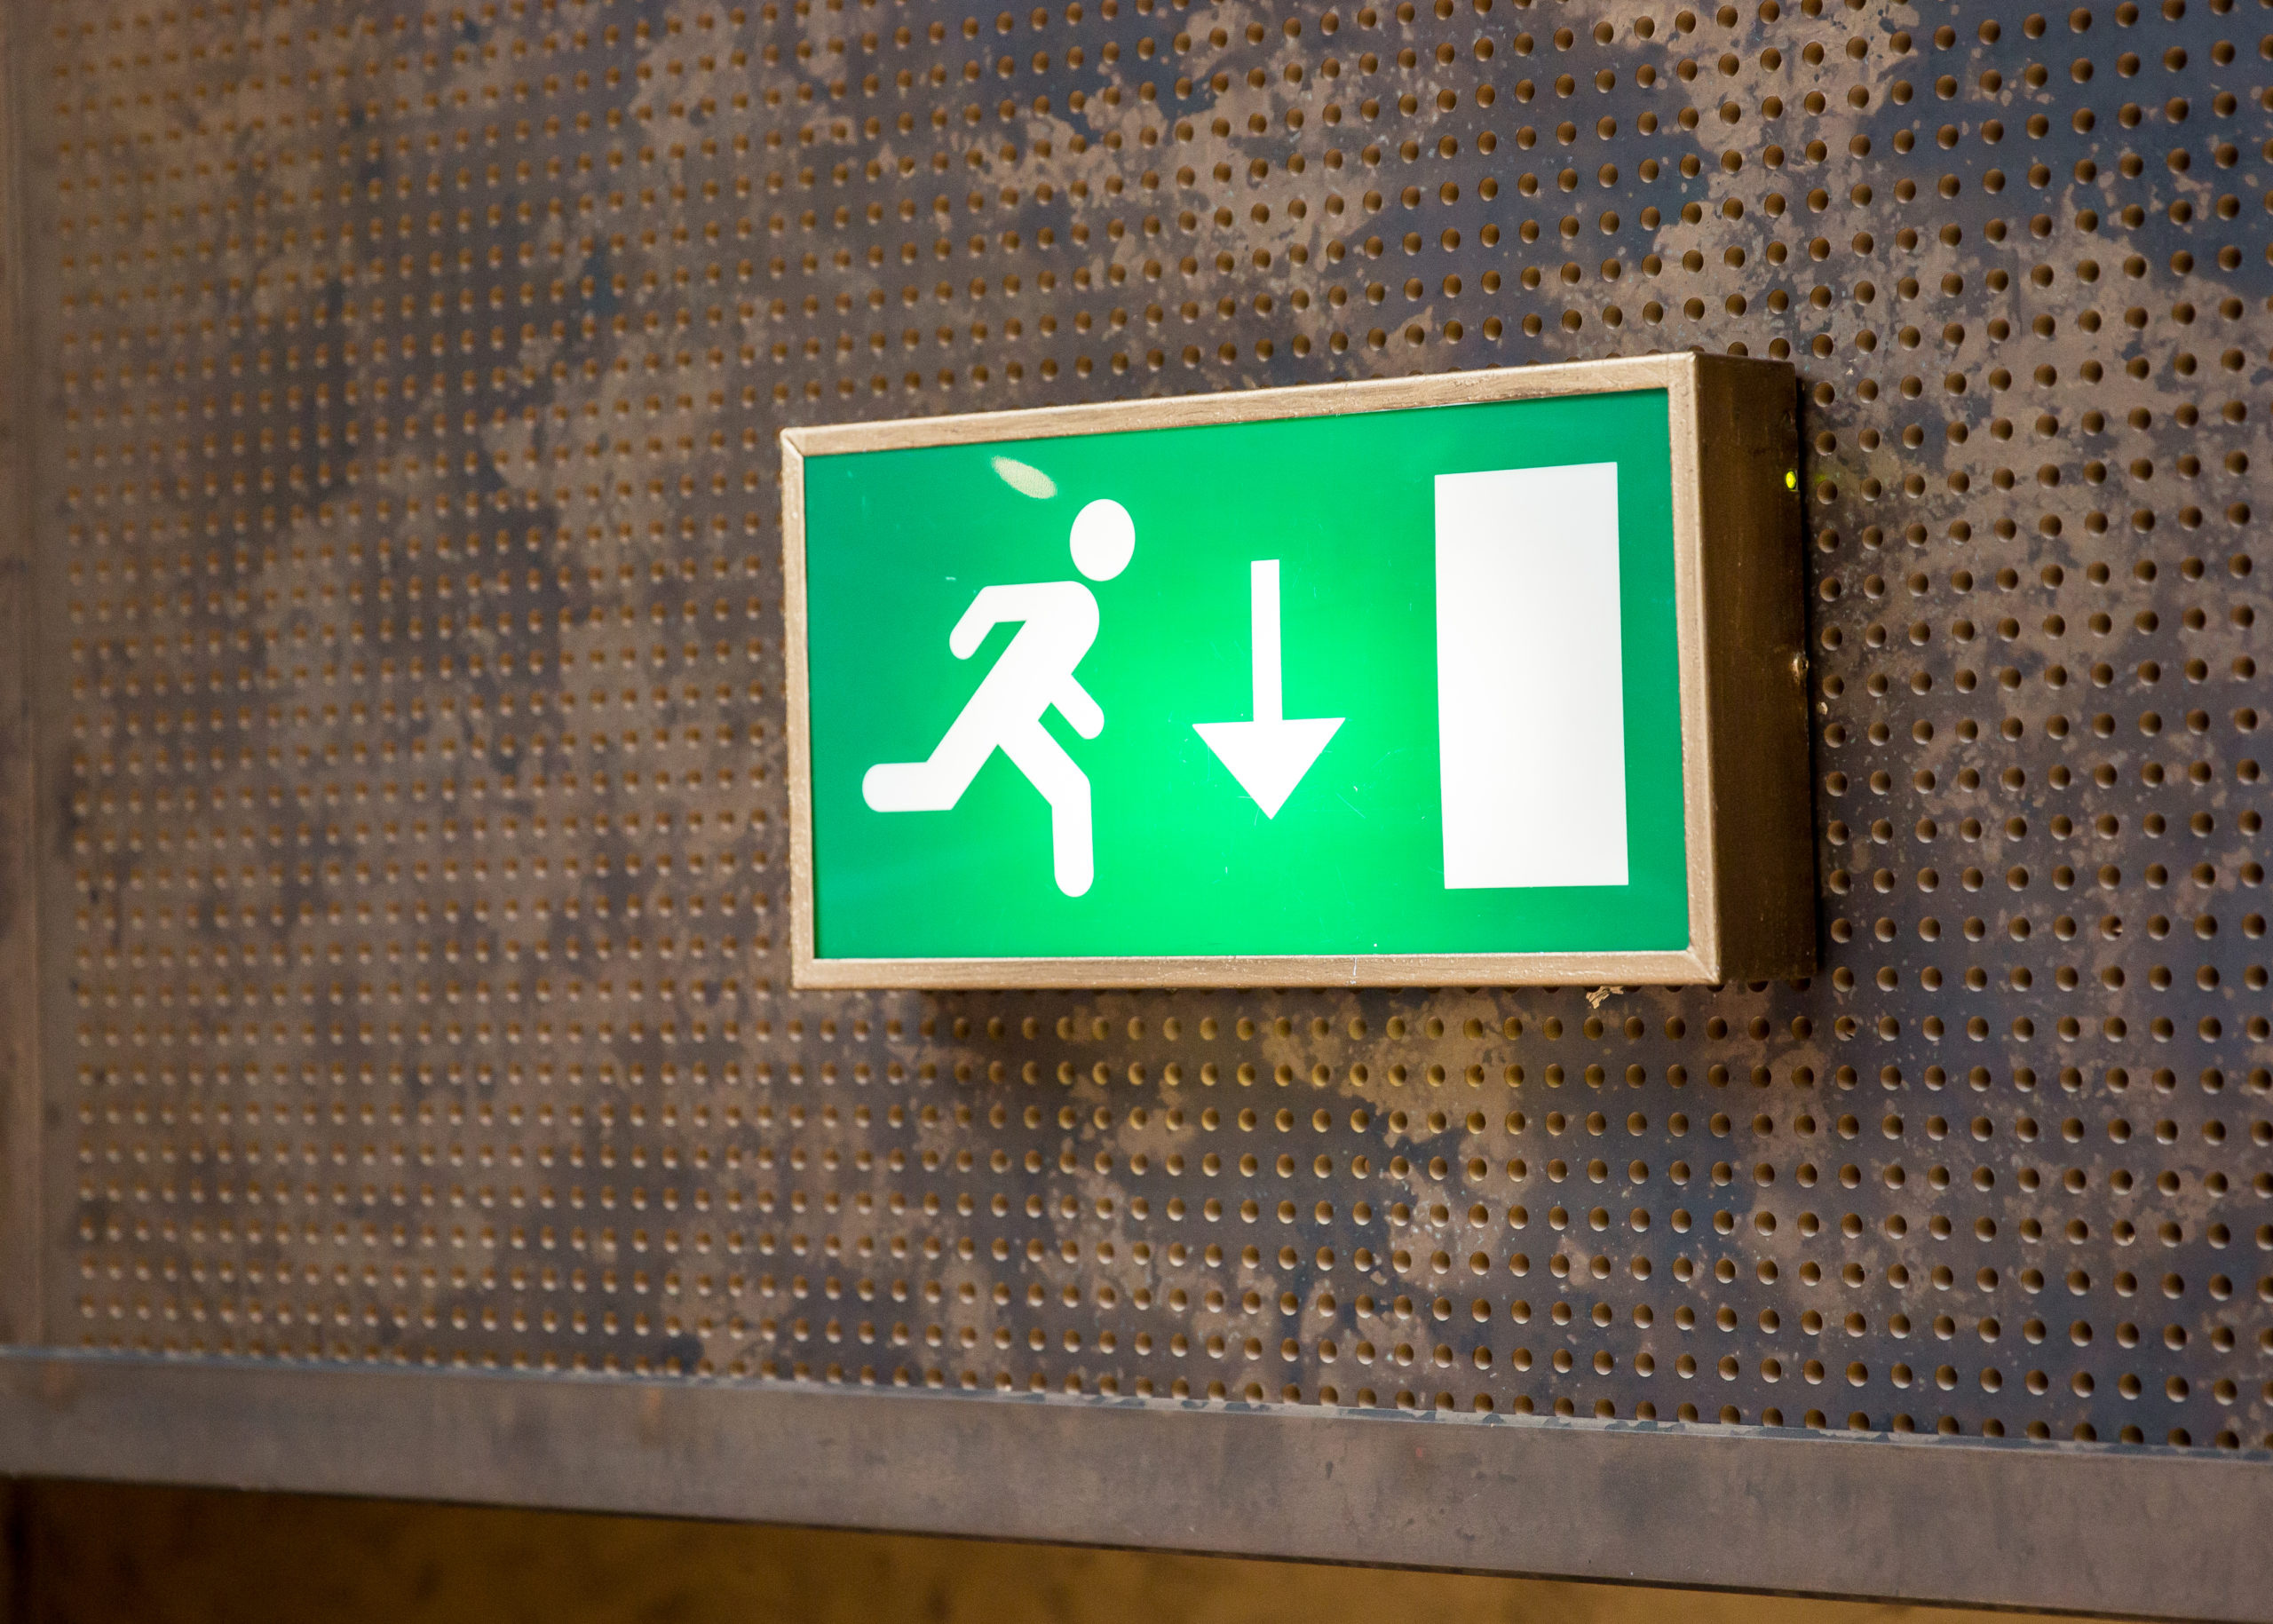 Lighted fire exit